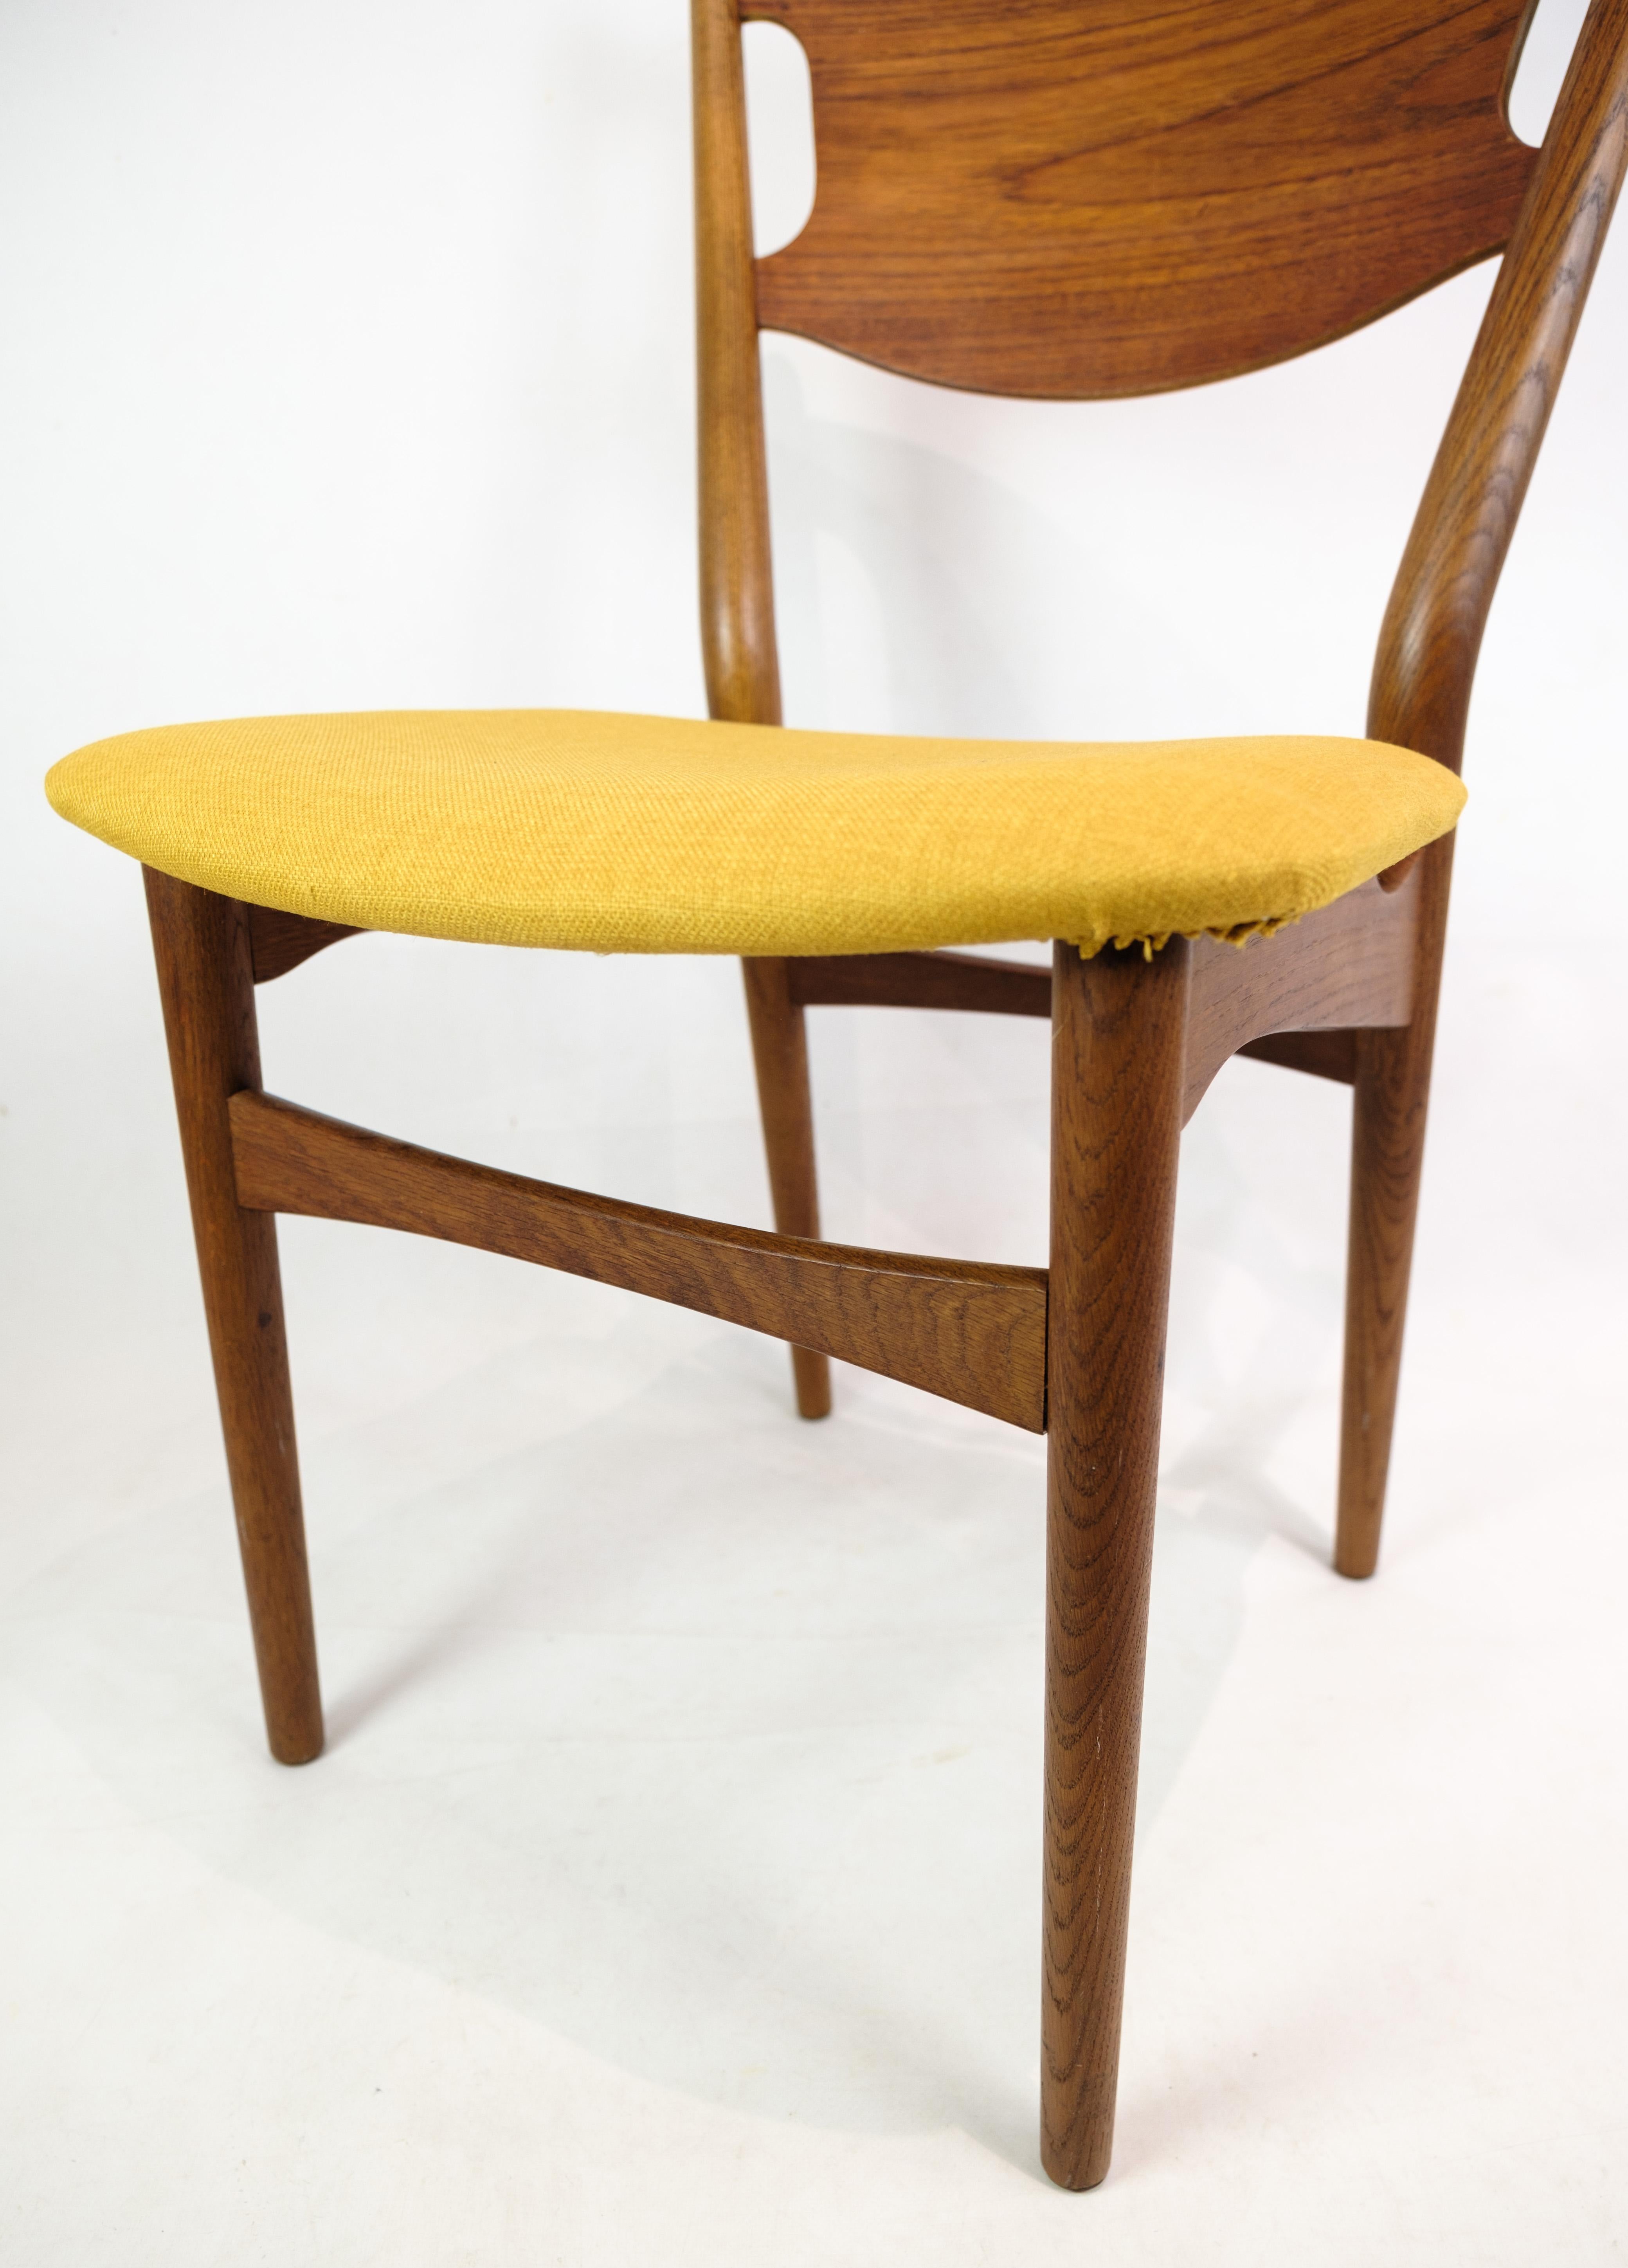 4 Dining Room Chairs, Danish Design, Teak Wood, Fabric Cover, 1960 For Sale 7